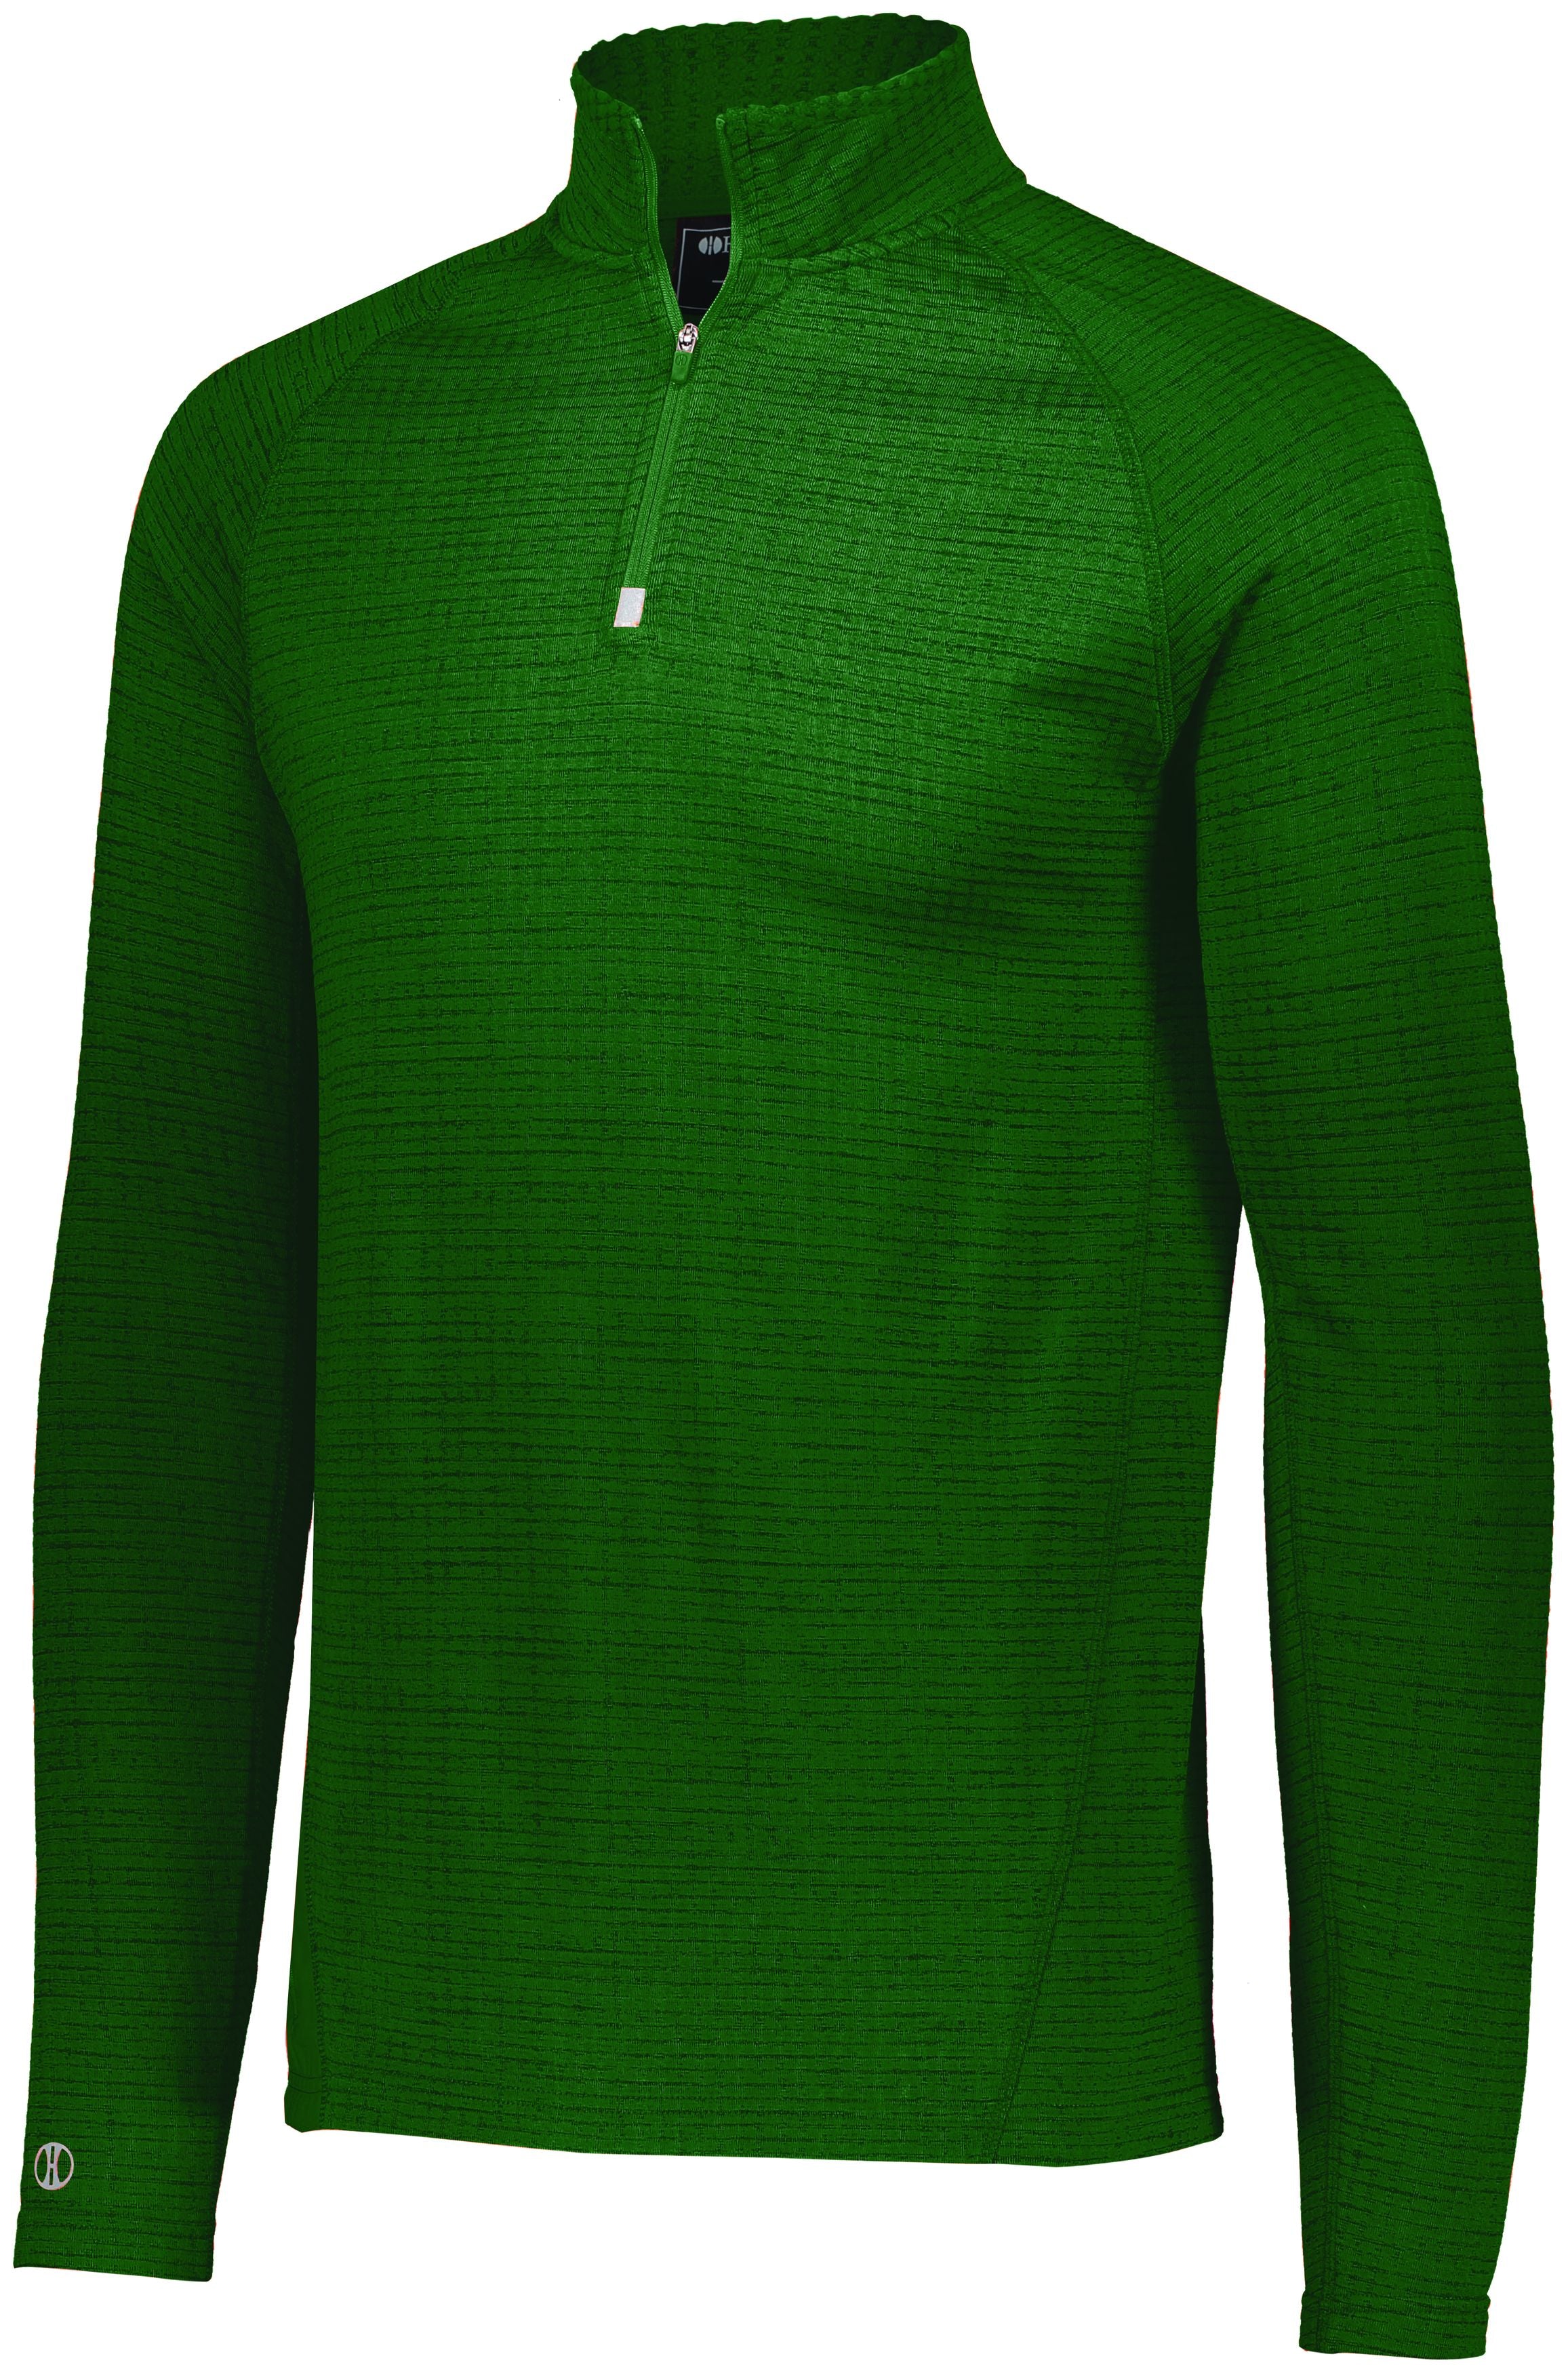 Holloway 3D Regulate Lightweight Pullover in Forest Heather  -Part of the Adult, Adult-Pullover, Holloway, Outerwear, 3D-Collection product lines at KanaleyCreations.com